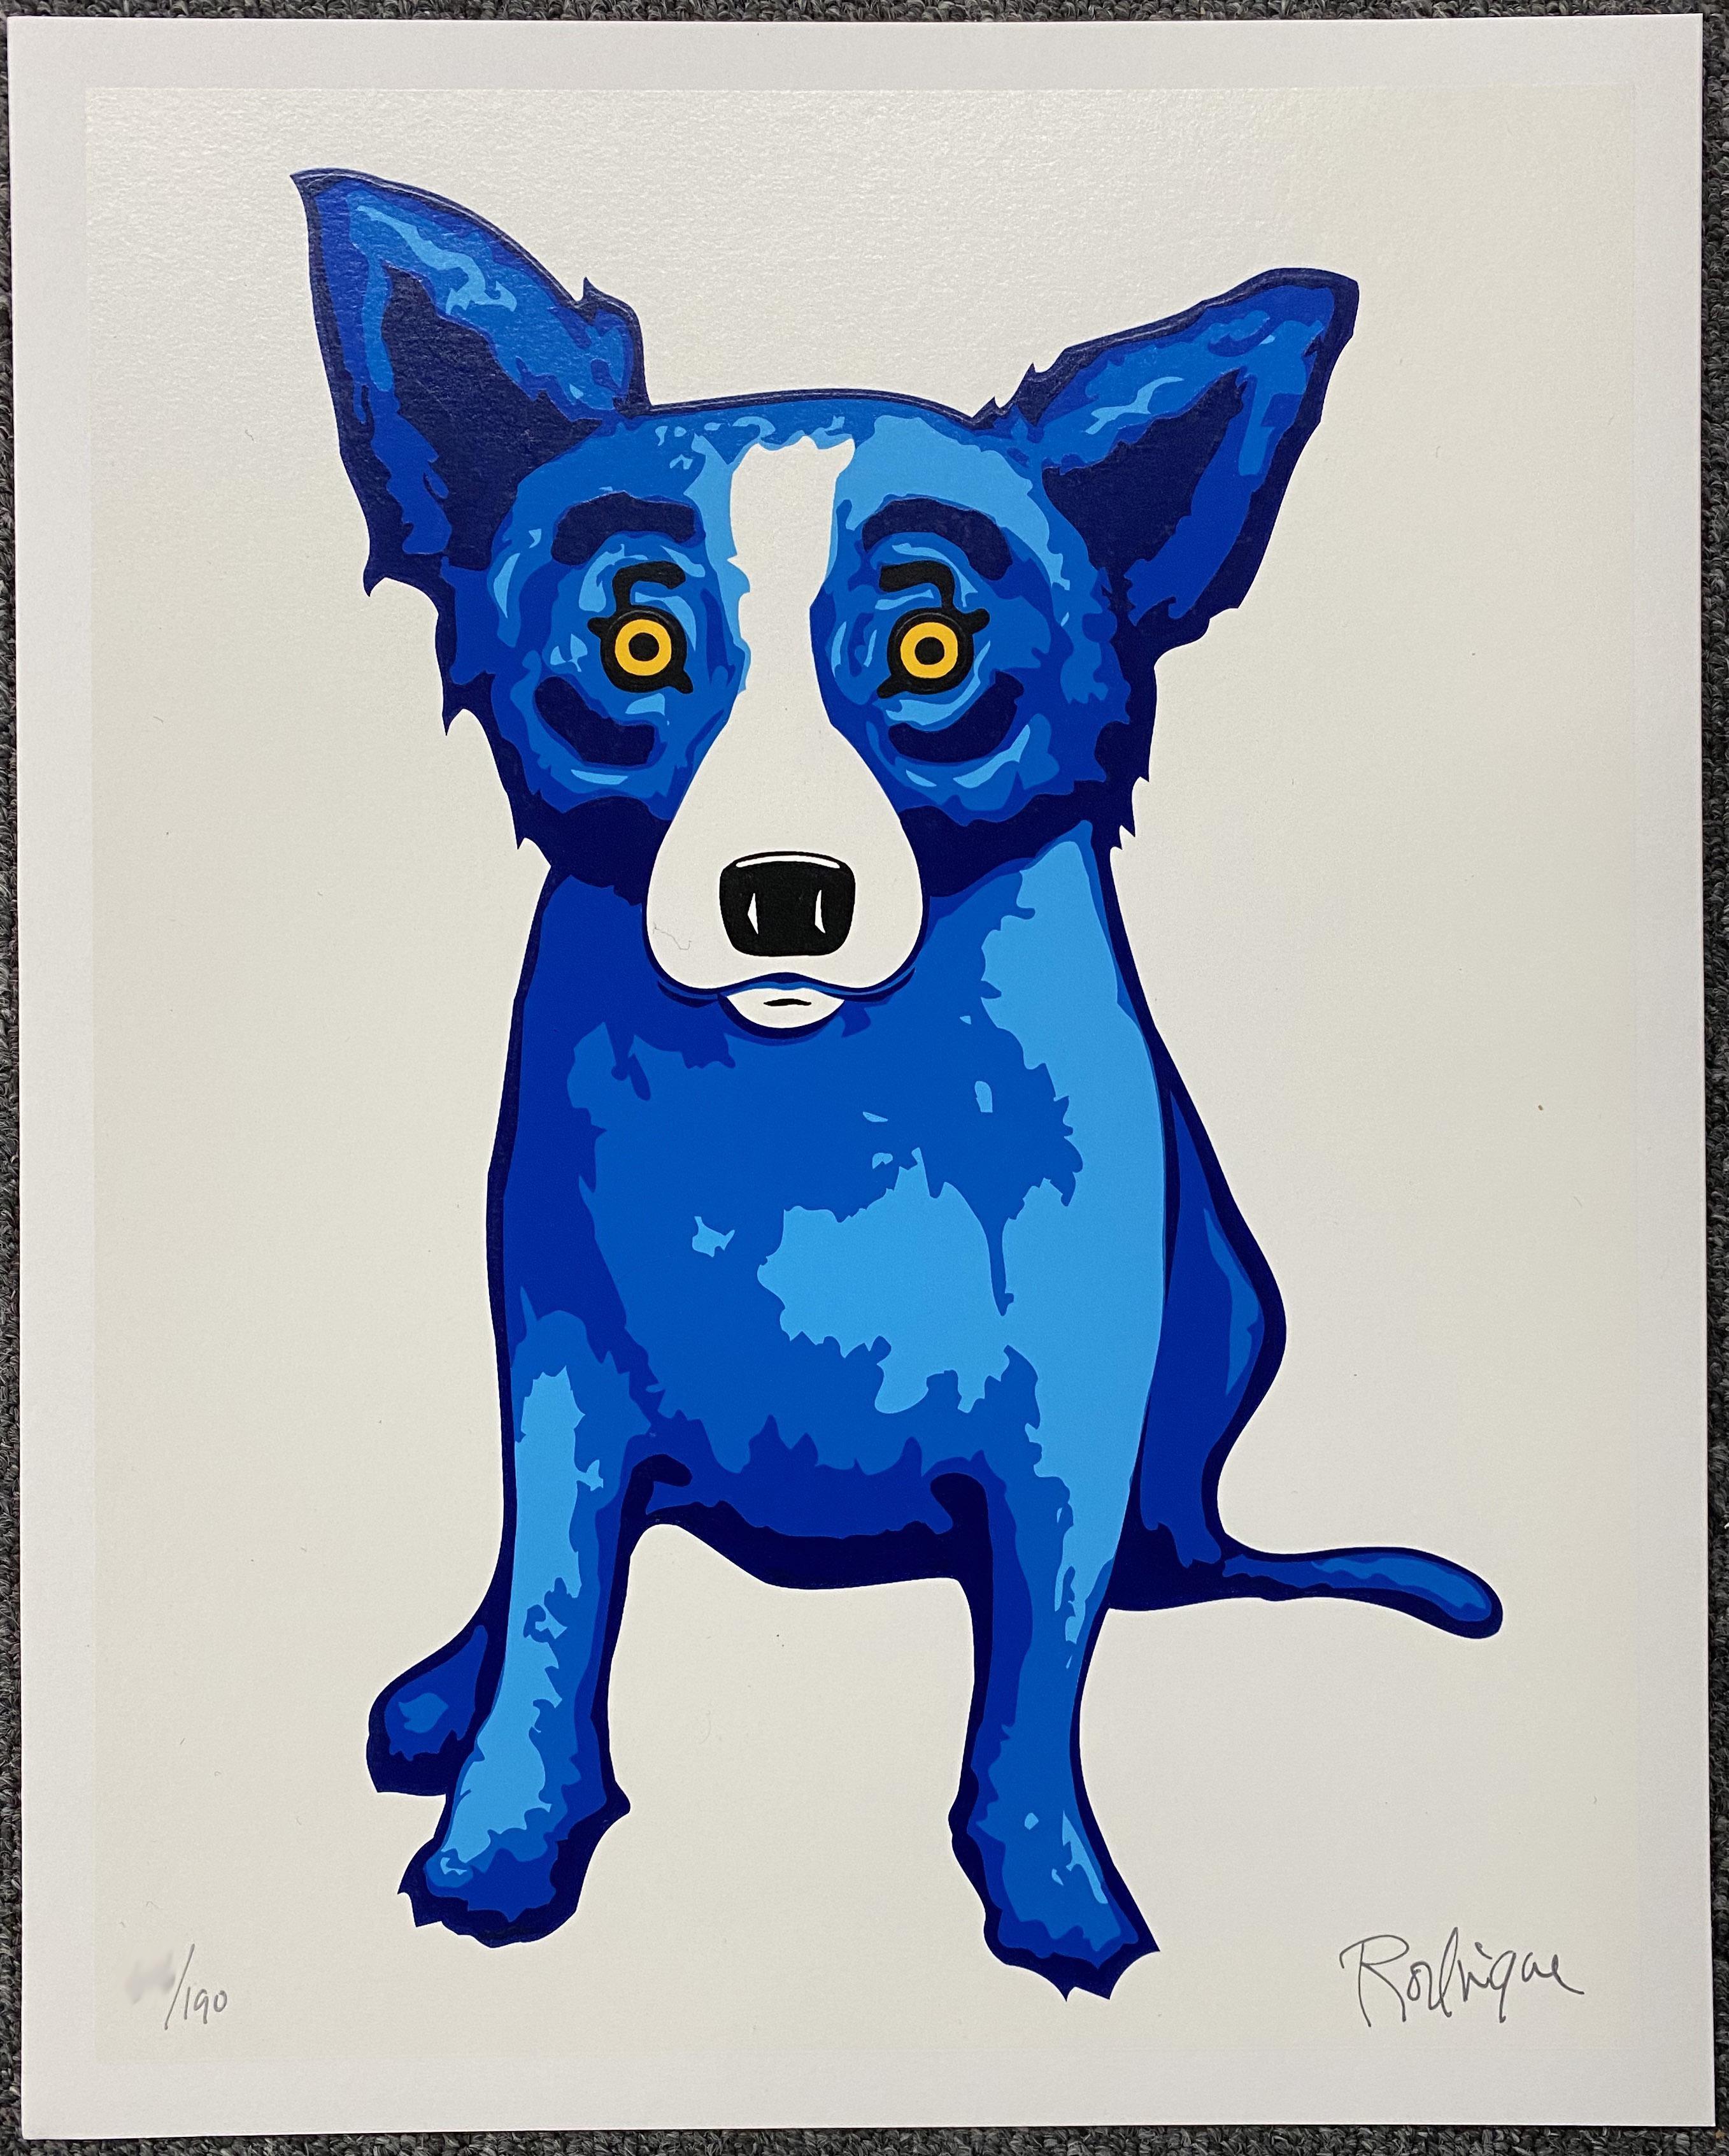 Artist: George Rodrigue

	
Title:  Purity of Soul

	
Year: 2005

	
Dimensions: 15in. by 12in.

	
Edition: From the rare limited Artist Proof edition

	
Medium: Original silkscreen on paper

	
Condition: Excellent

	
Signature Details: Hand signed